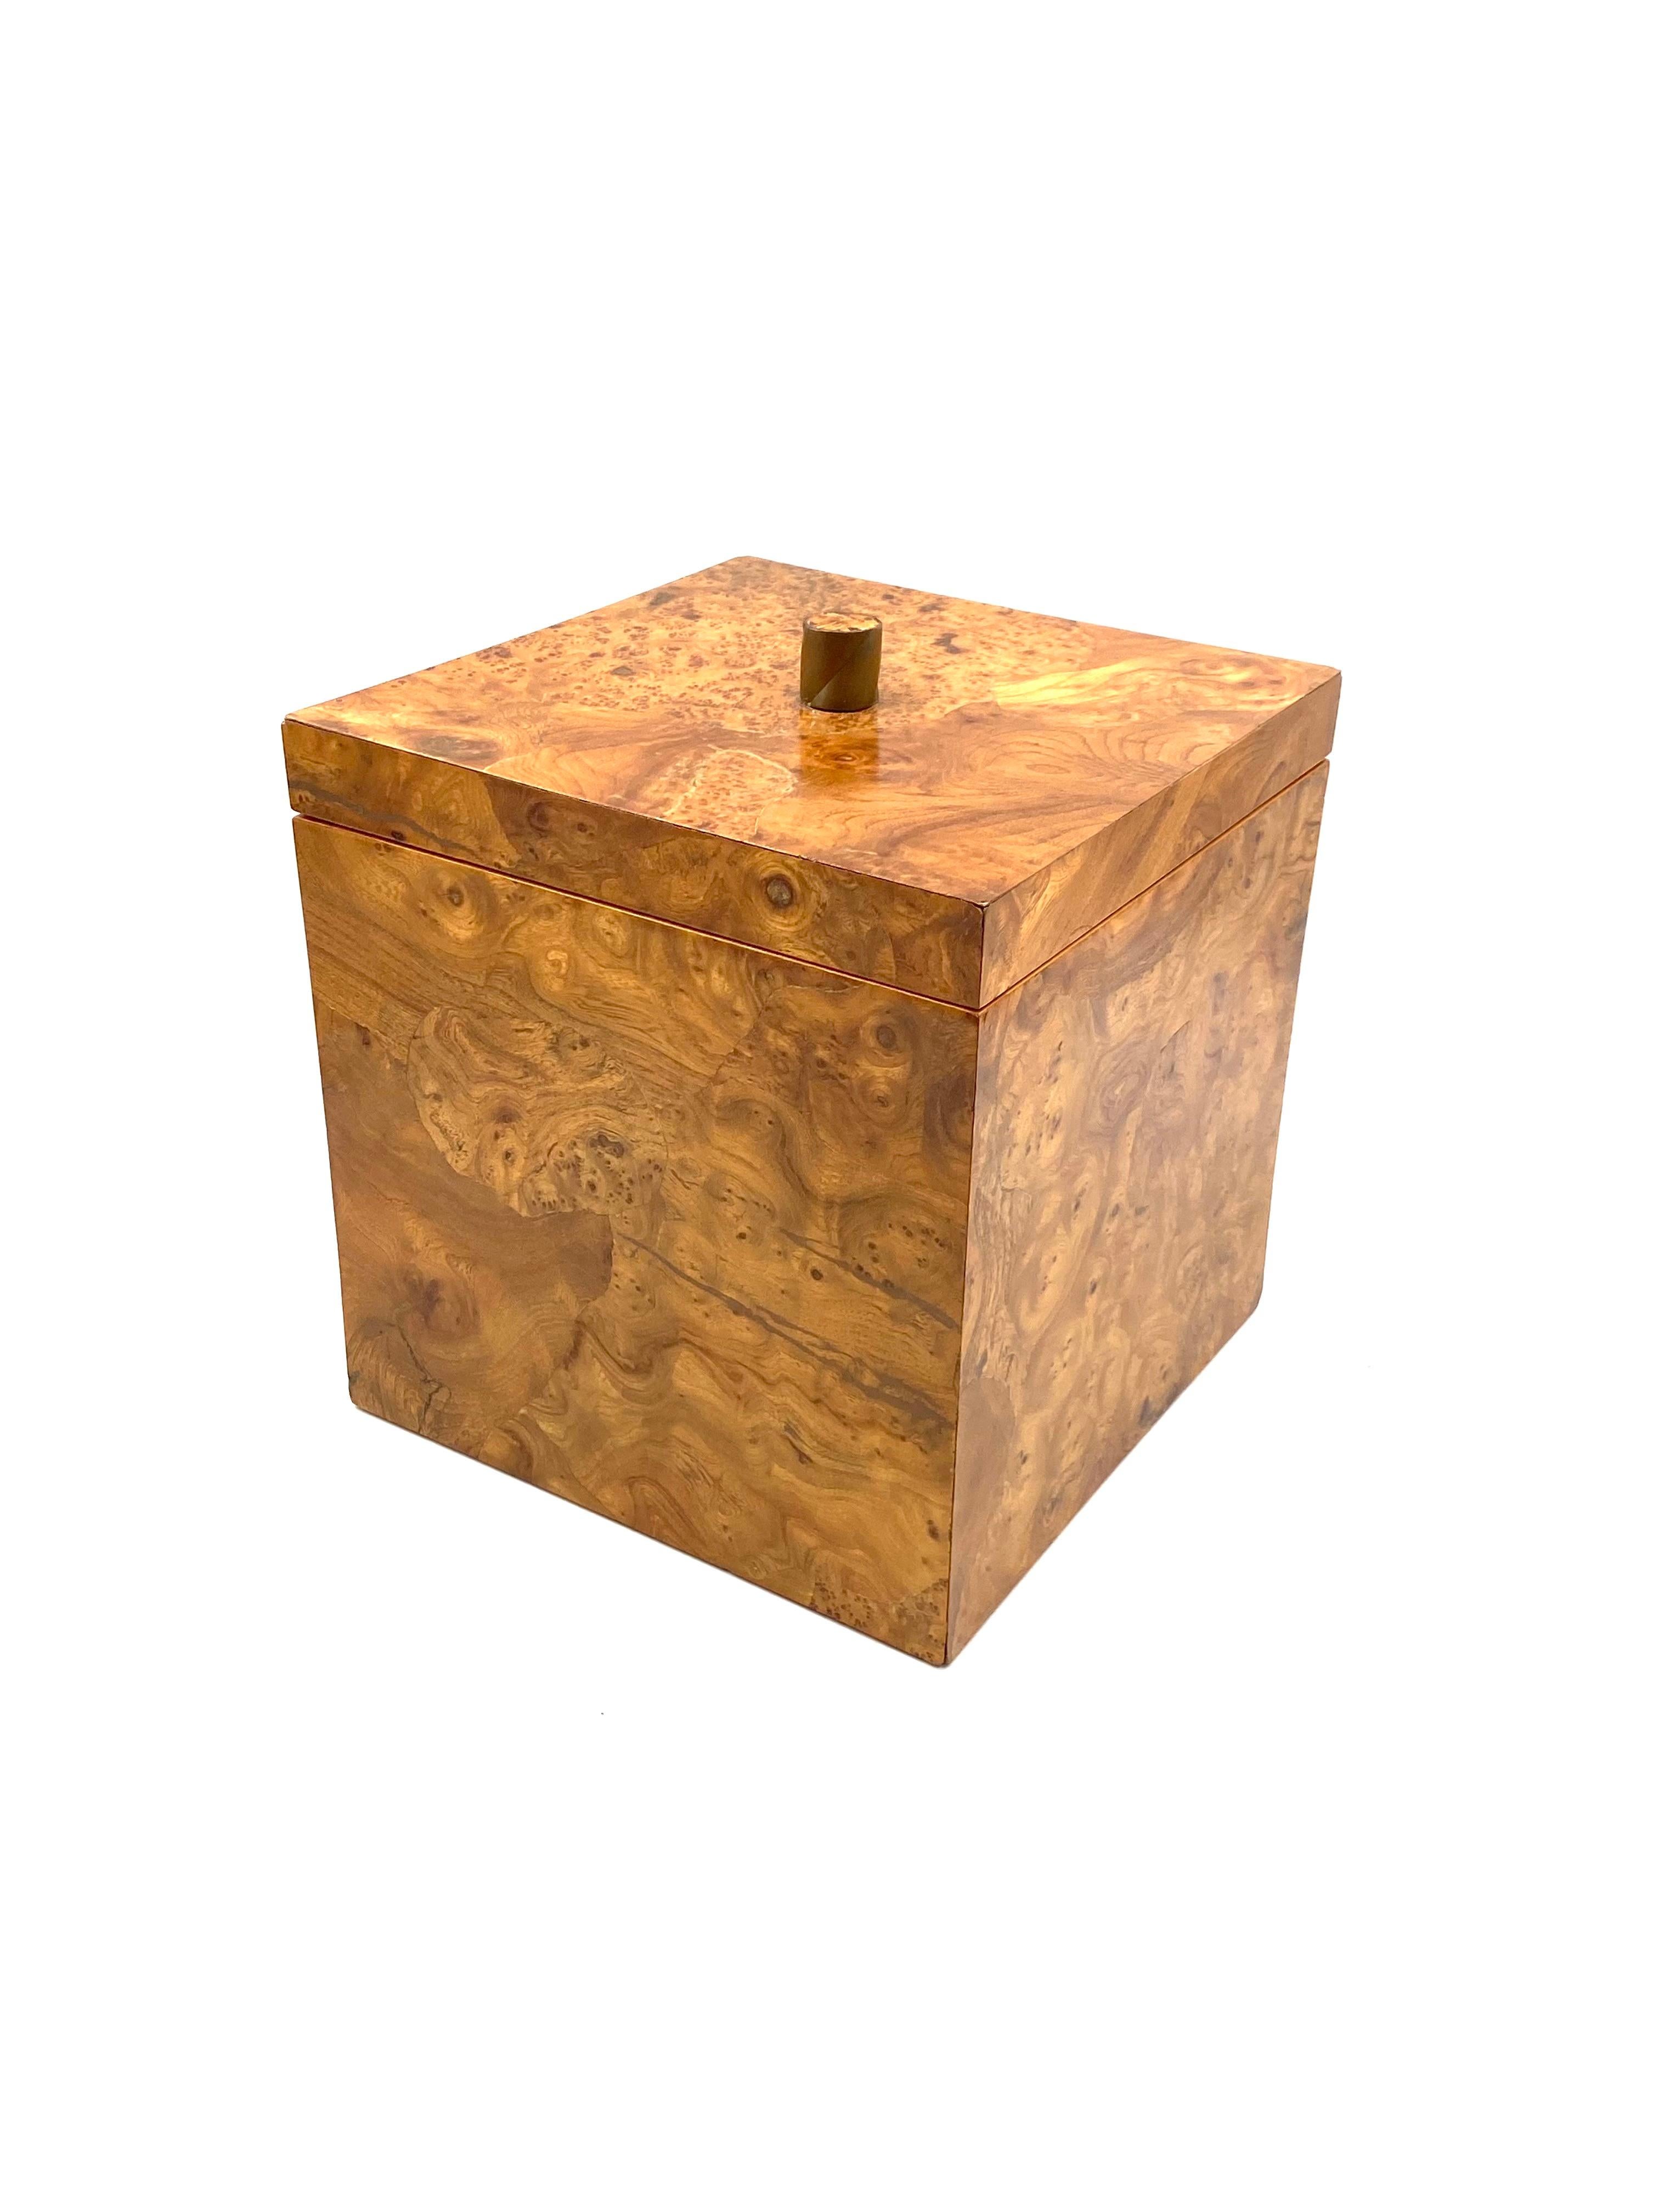 Hollywood regency monumental burl wood and brass ice bucket, Italy 1970s For Sale 1